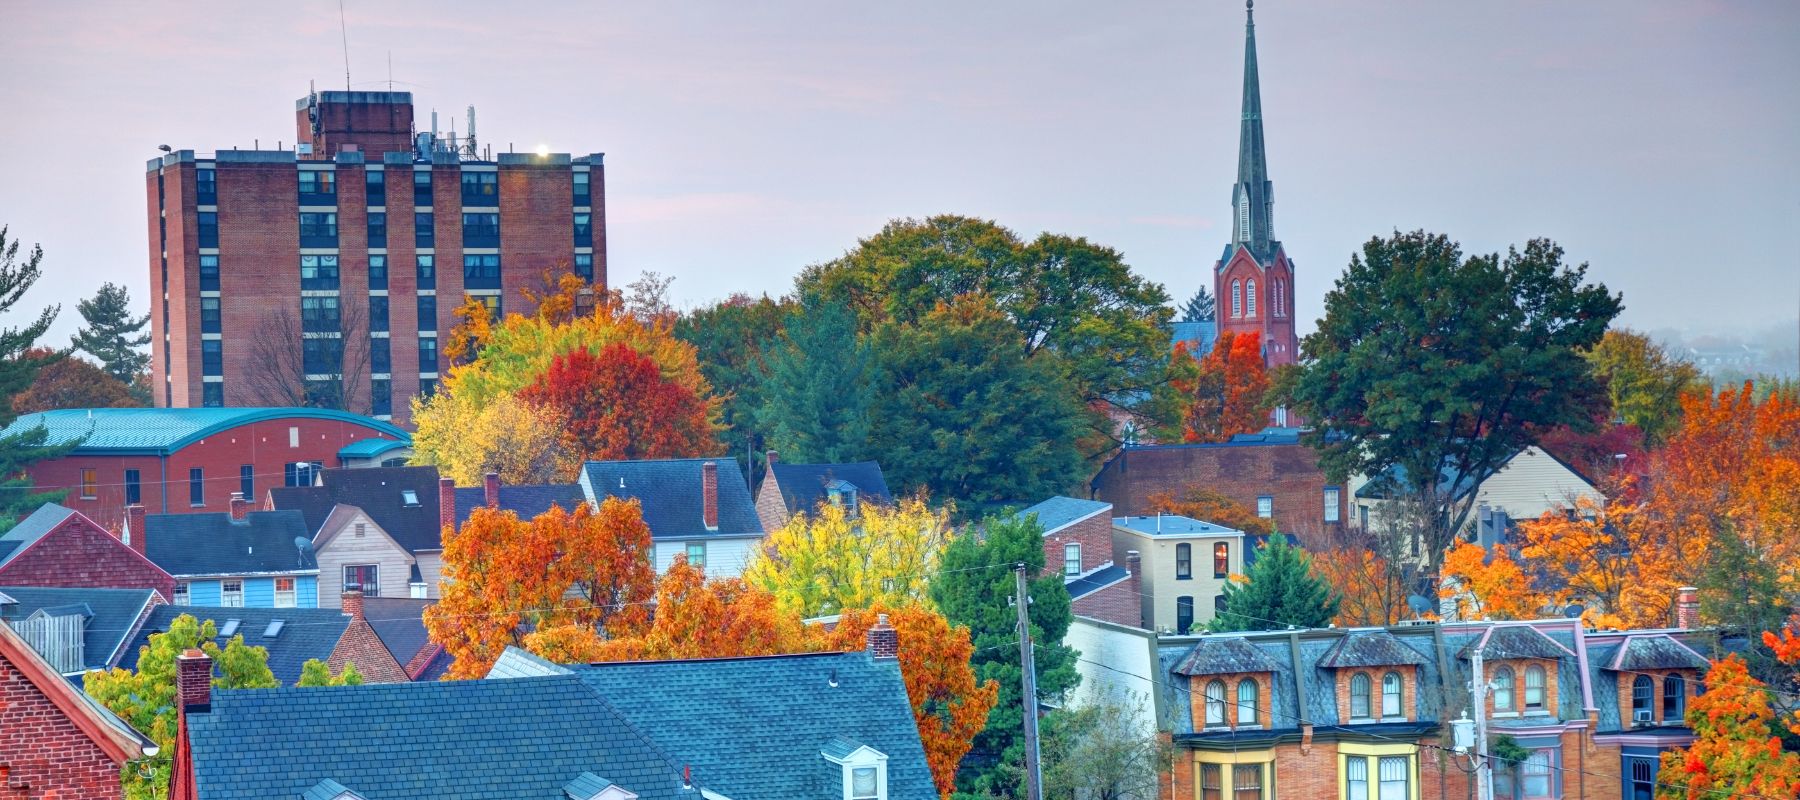 pennsylvania city during the fall with colorful fall foliage and historical looking buildings